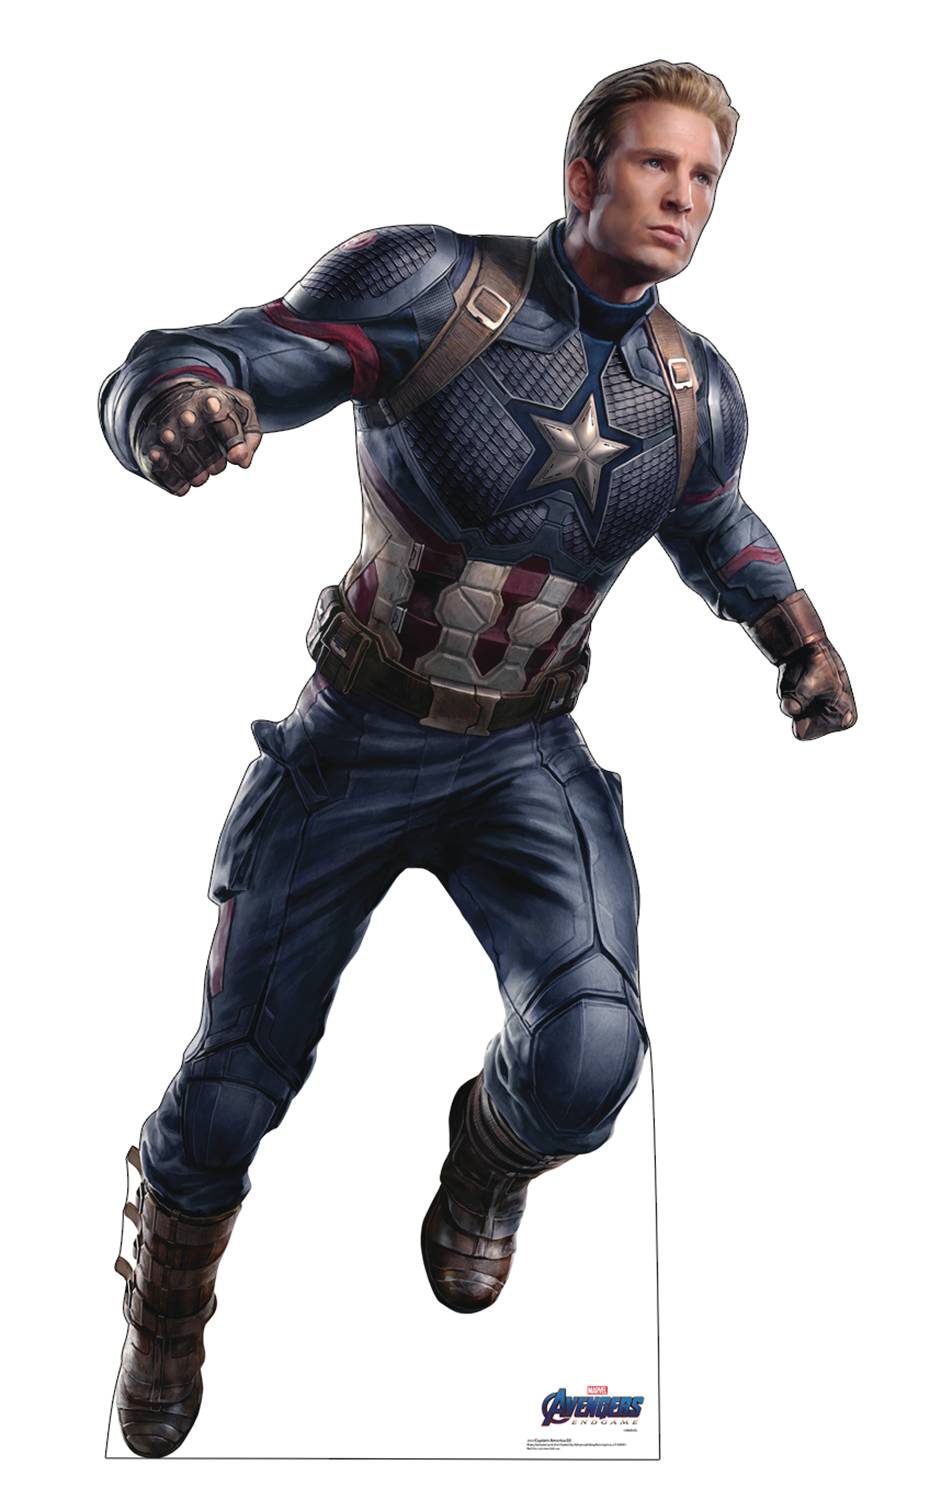 Avengers Endgame Captain America Life Size Stand-Up